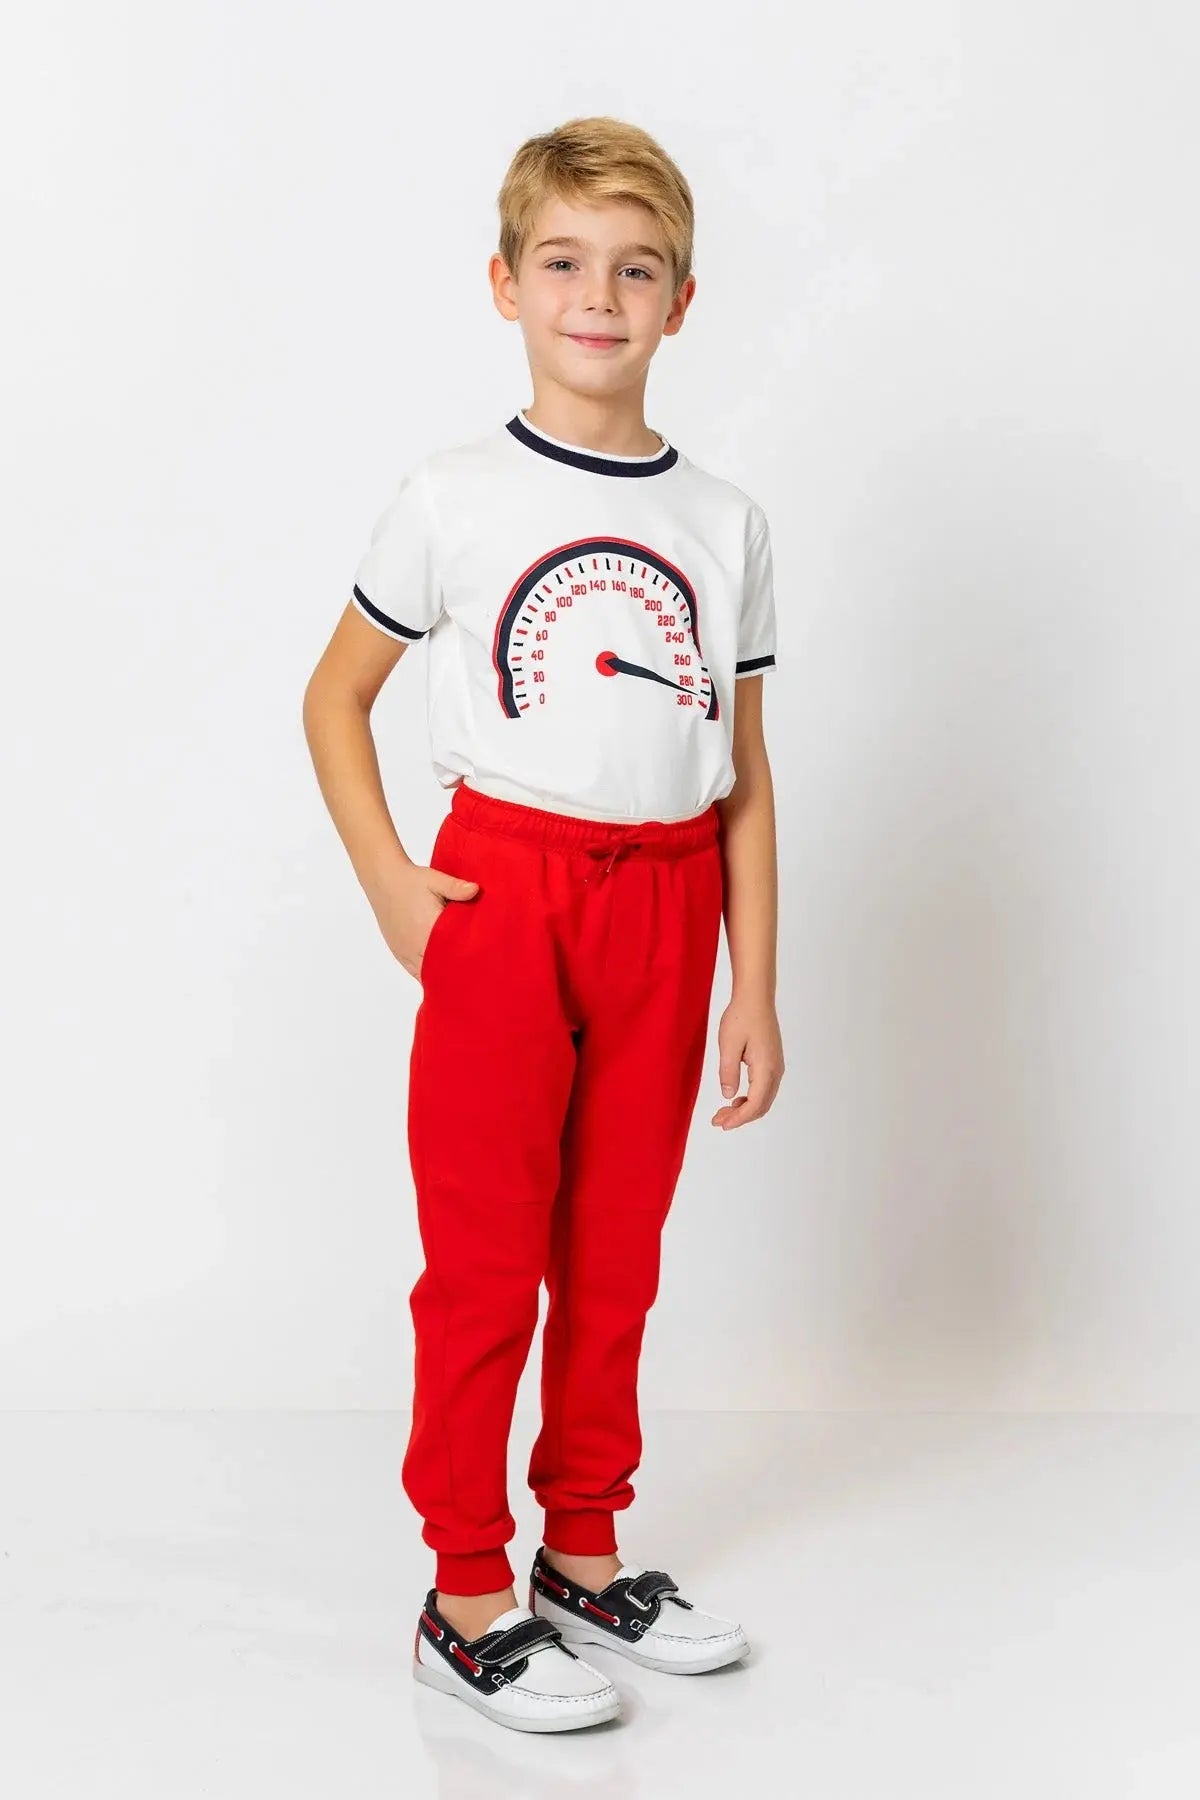 ZHAGHMIN Boys Dance Pants Toddler Boys Girls Solid Color Cool Breathable  Home Pants Casual Pants Outwear Fashion for Children Clothes Boys  Sweatpants